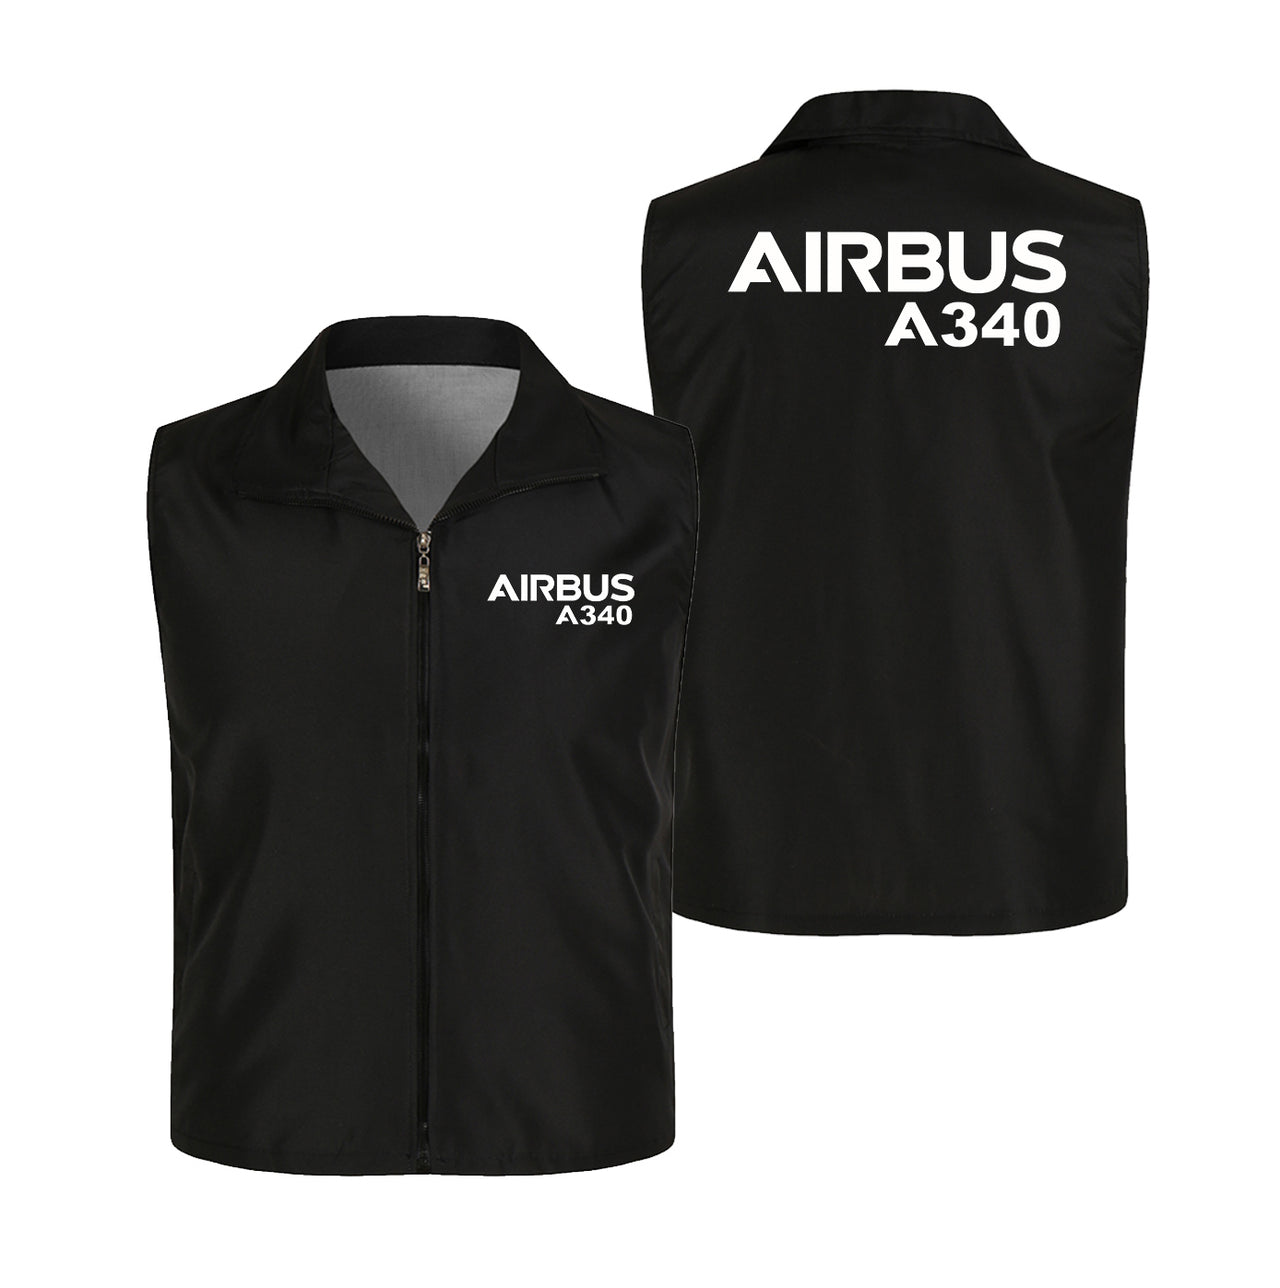 Airbus A340 & Text Designed Thin Style Vests